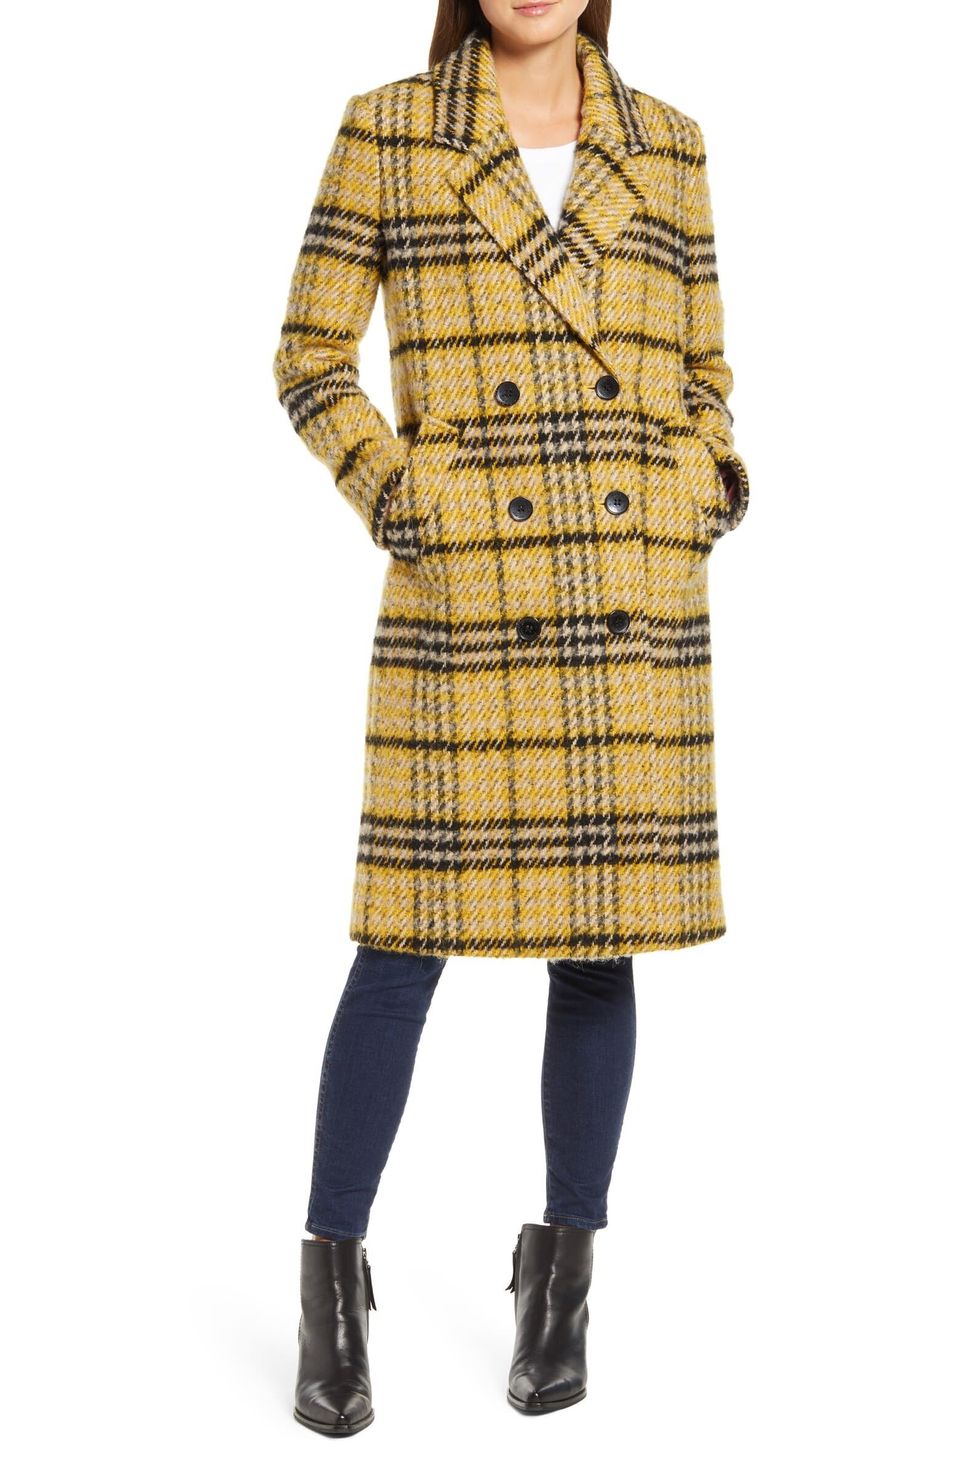 All The Winter Coats Worth Snagging During The Nordstrom Half-Yearly ...